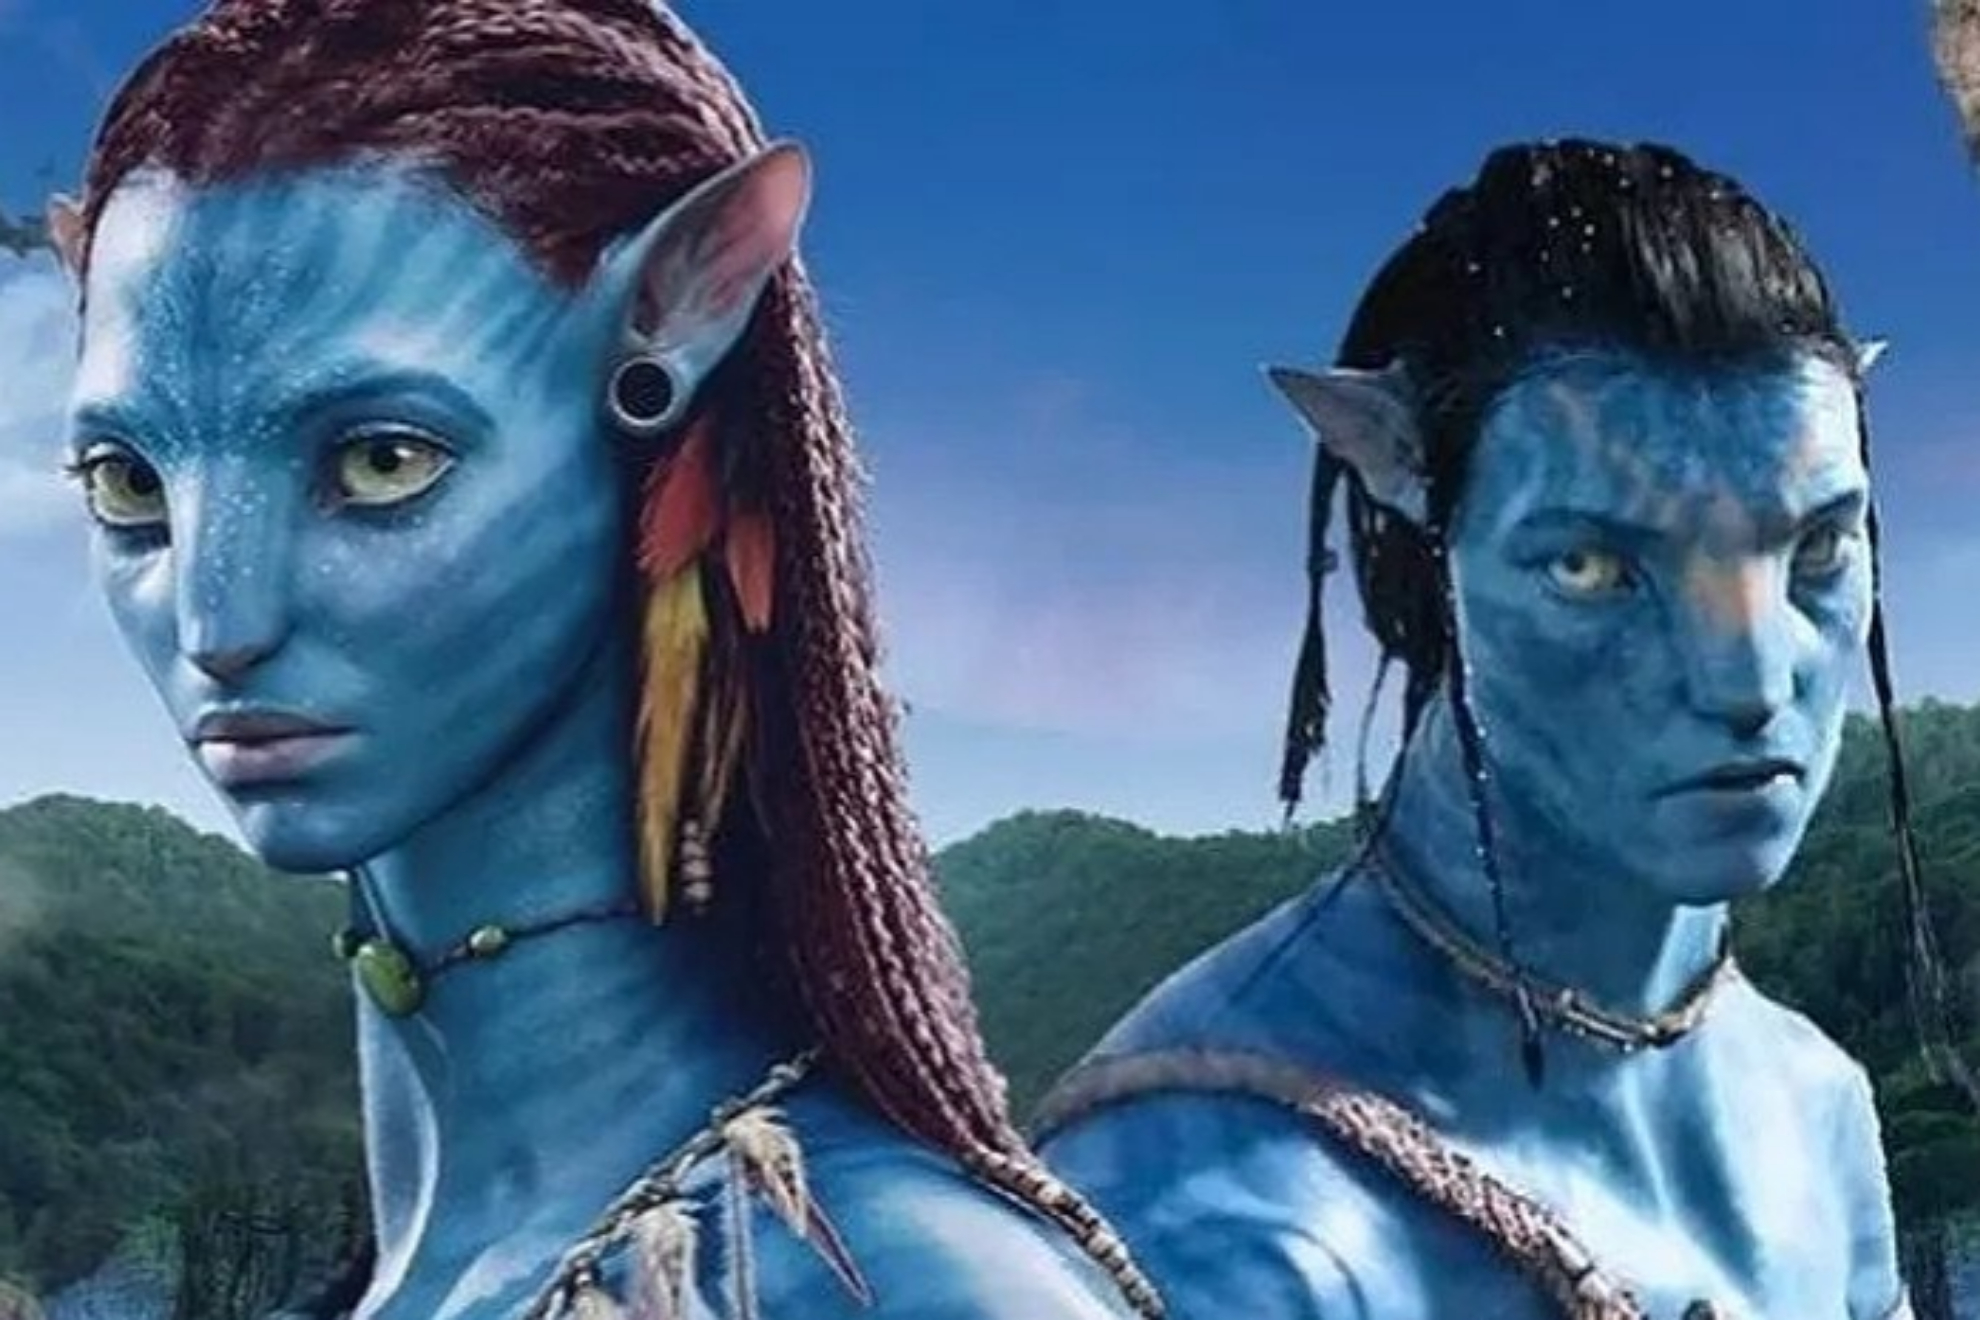 Avatar Way Of Water Box Office Film sells over 4 lakh 40 thousand tickets  before release surpasses KGF 2 advance sales 2 days before release  Bollywood Box Office  Bollywood Hungama